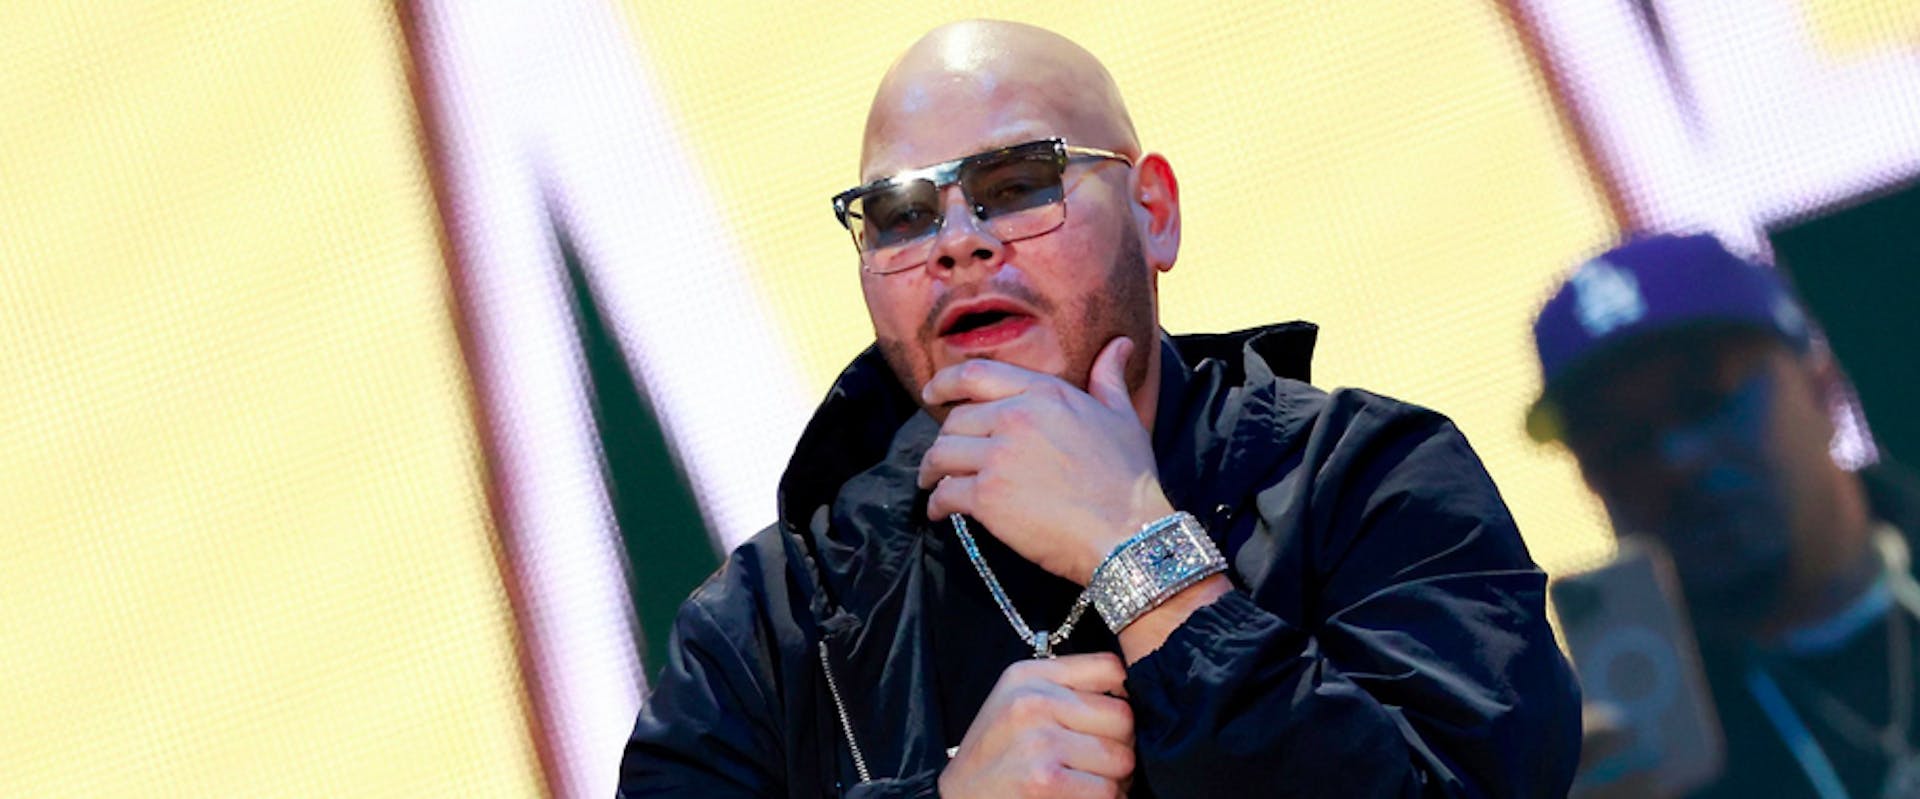 MIAMI, FLORIDA - OCTOBER 15: Fat Joe performs onstage at the 2022 iHeartRadio Fiesta Latina held at FTX Arena on October 15, 2022 in Miami, Florida. 